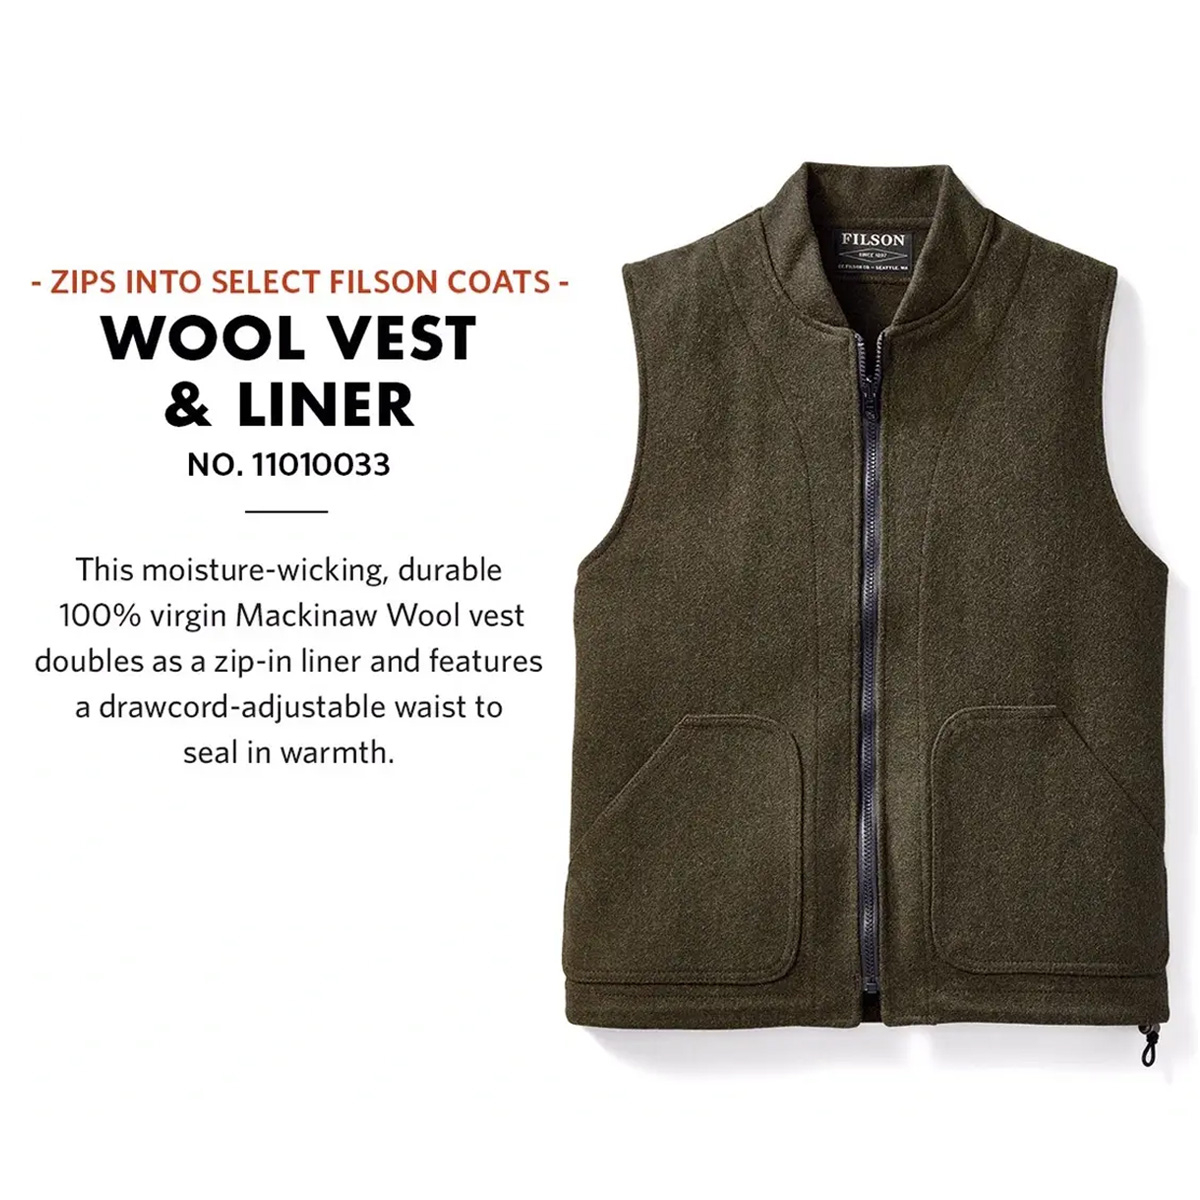 Filson Mackinaw Wool Vest Liner Forest Green, classic wool vest made with 100% virgin Mackinaw Wool and cut roomy for easy layering